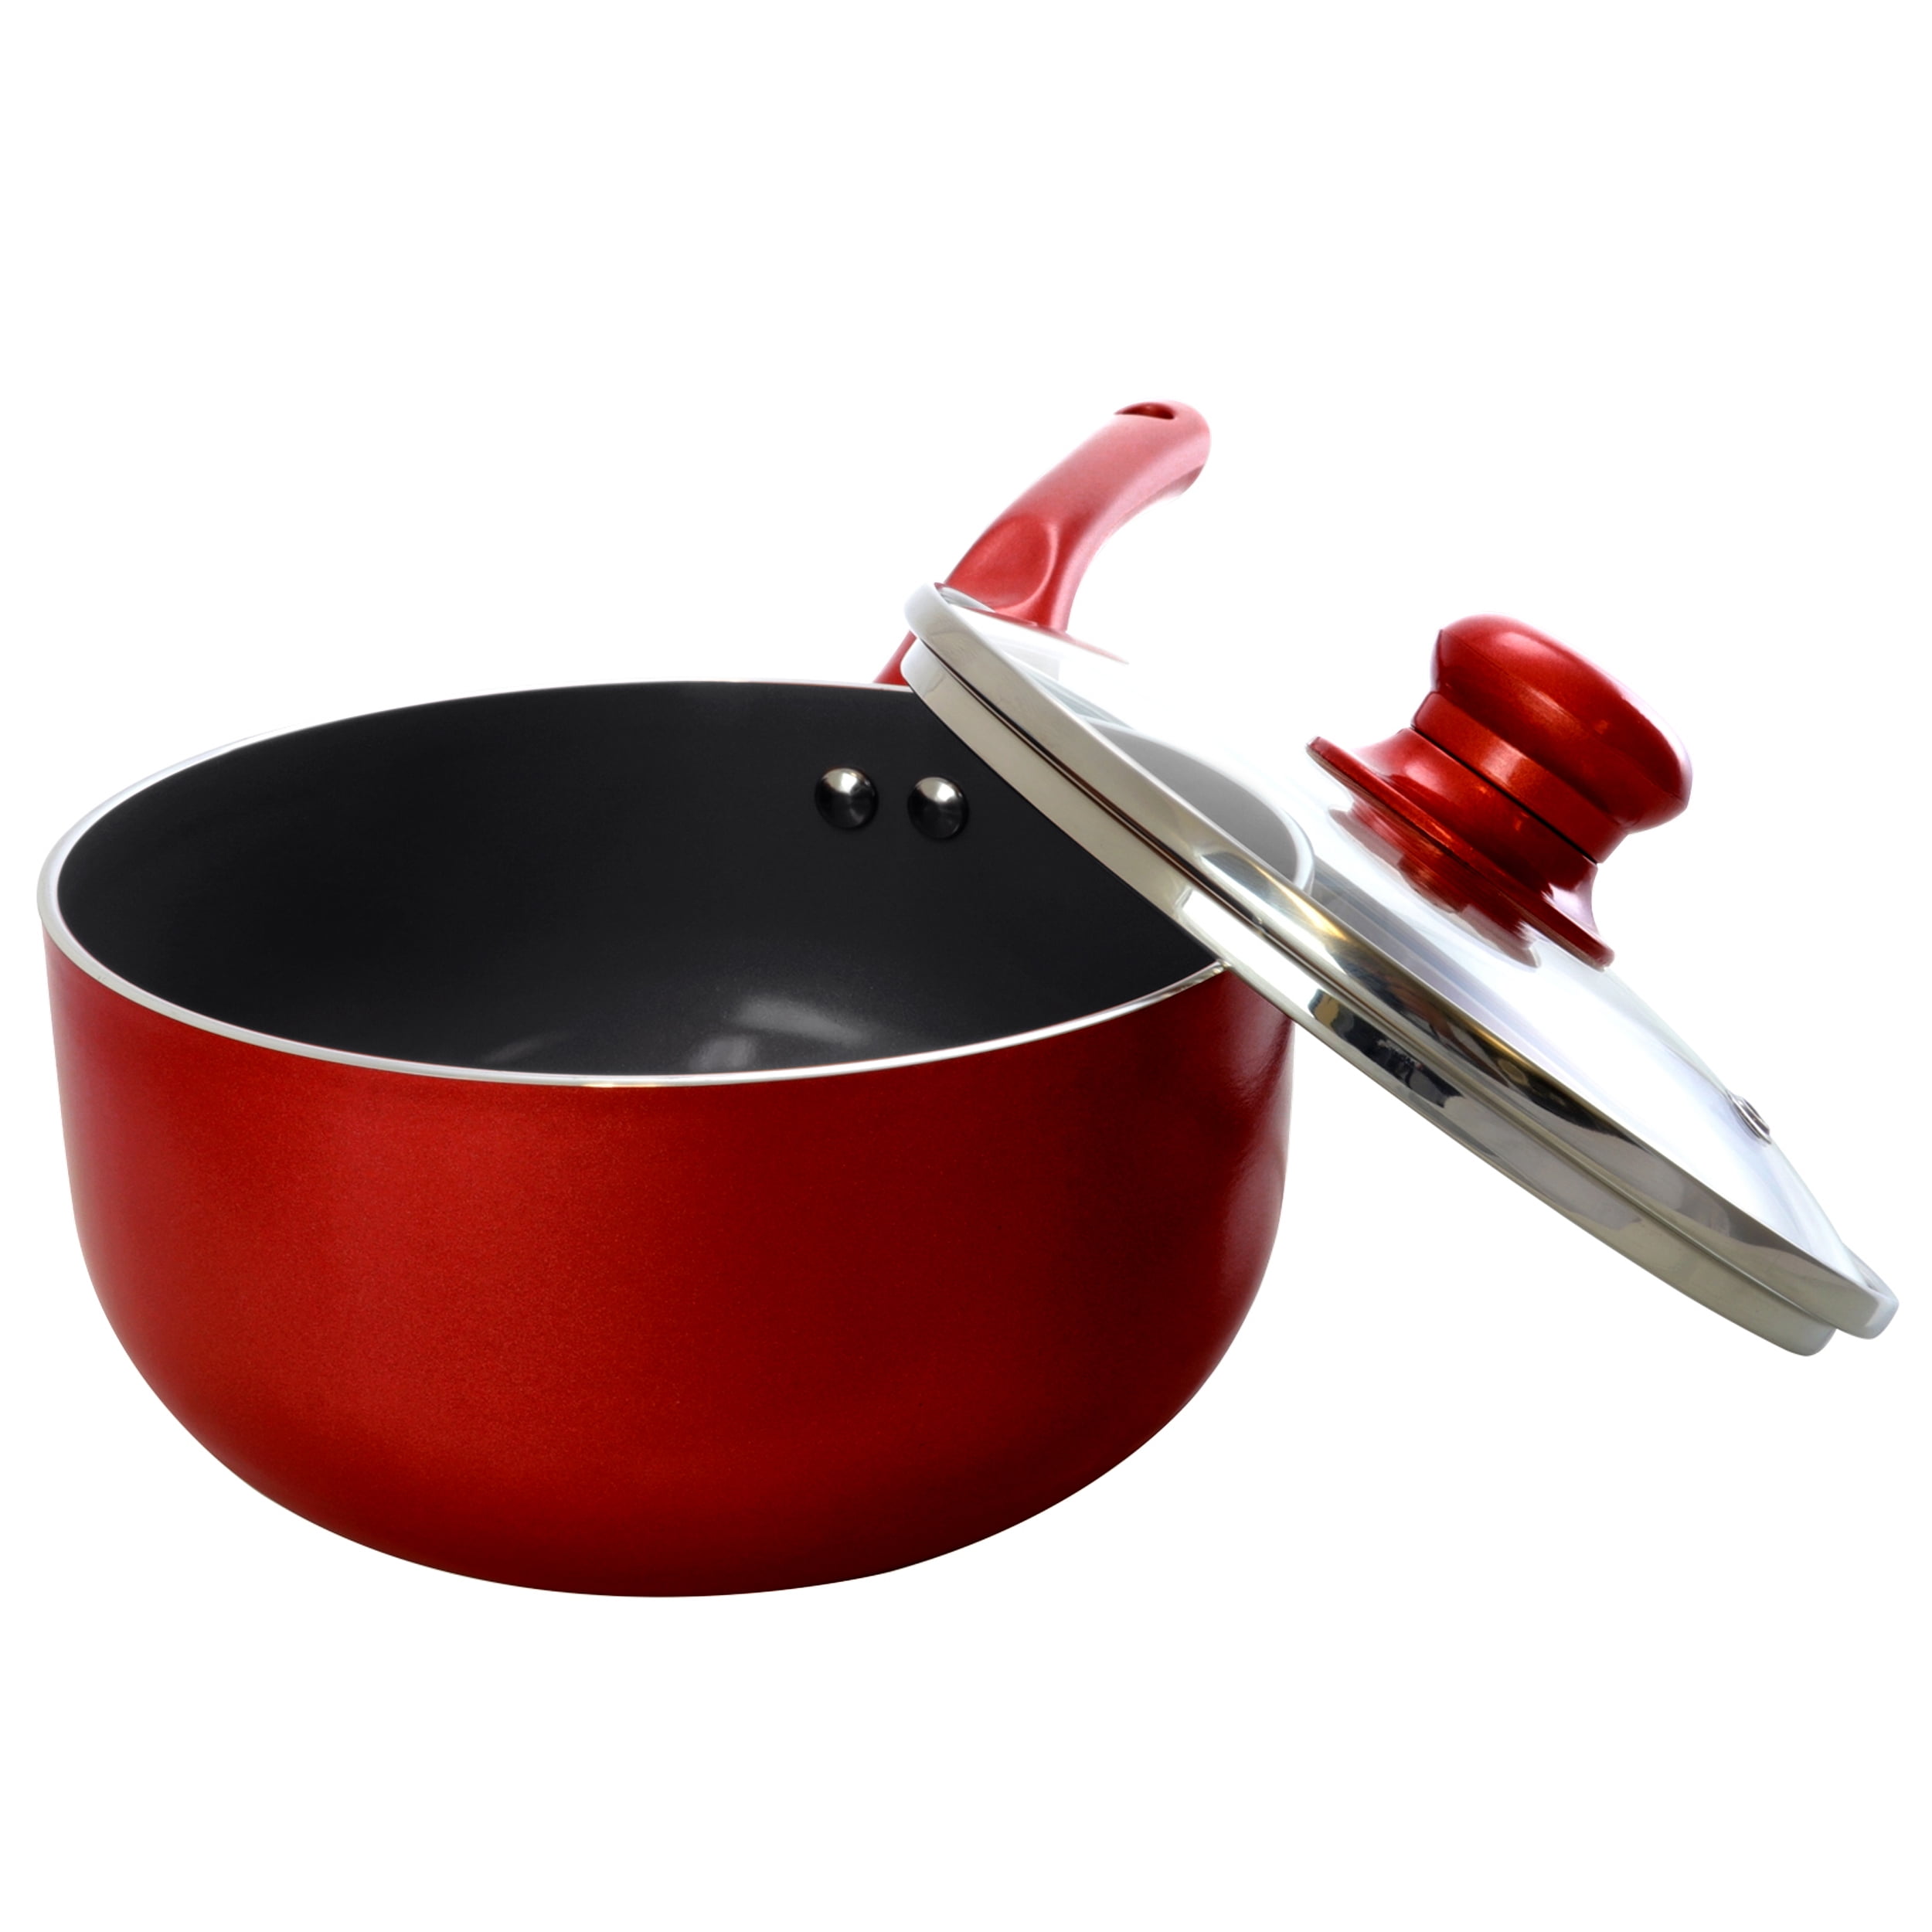 I've seen several chefs and rs use these glass cooking pots. Anybody  know what they are called specifically and where I can get one either in a  store or online? : r/UncleRoger